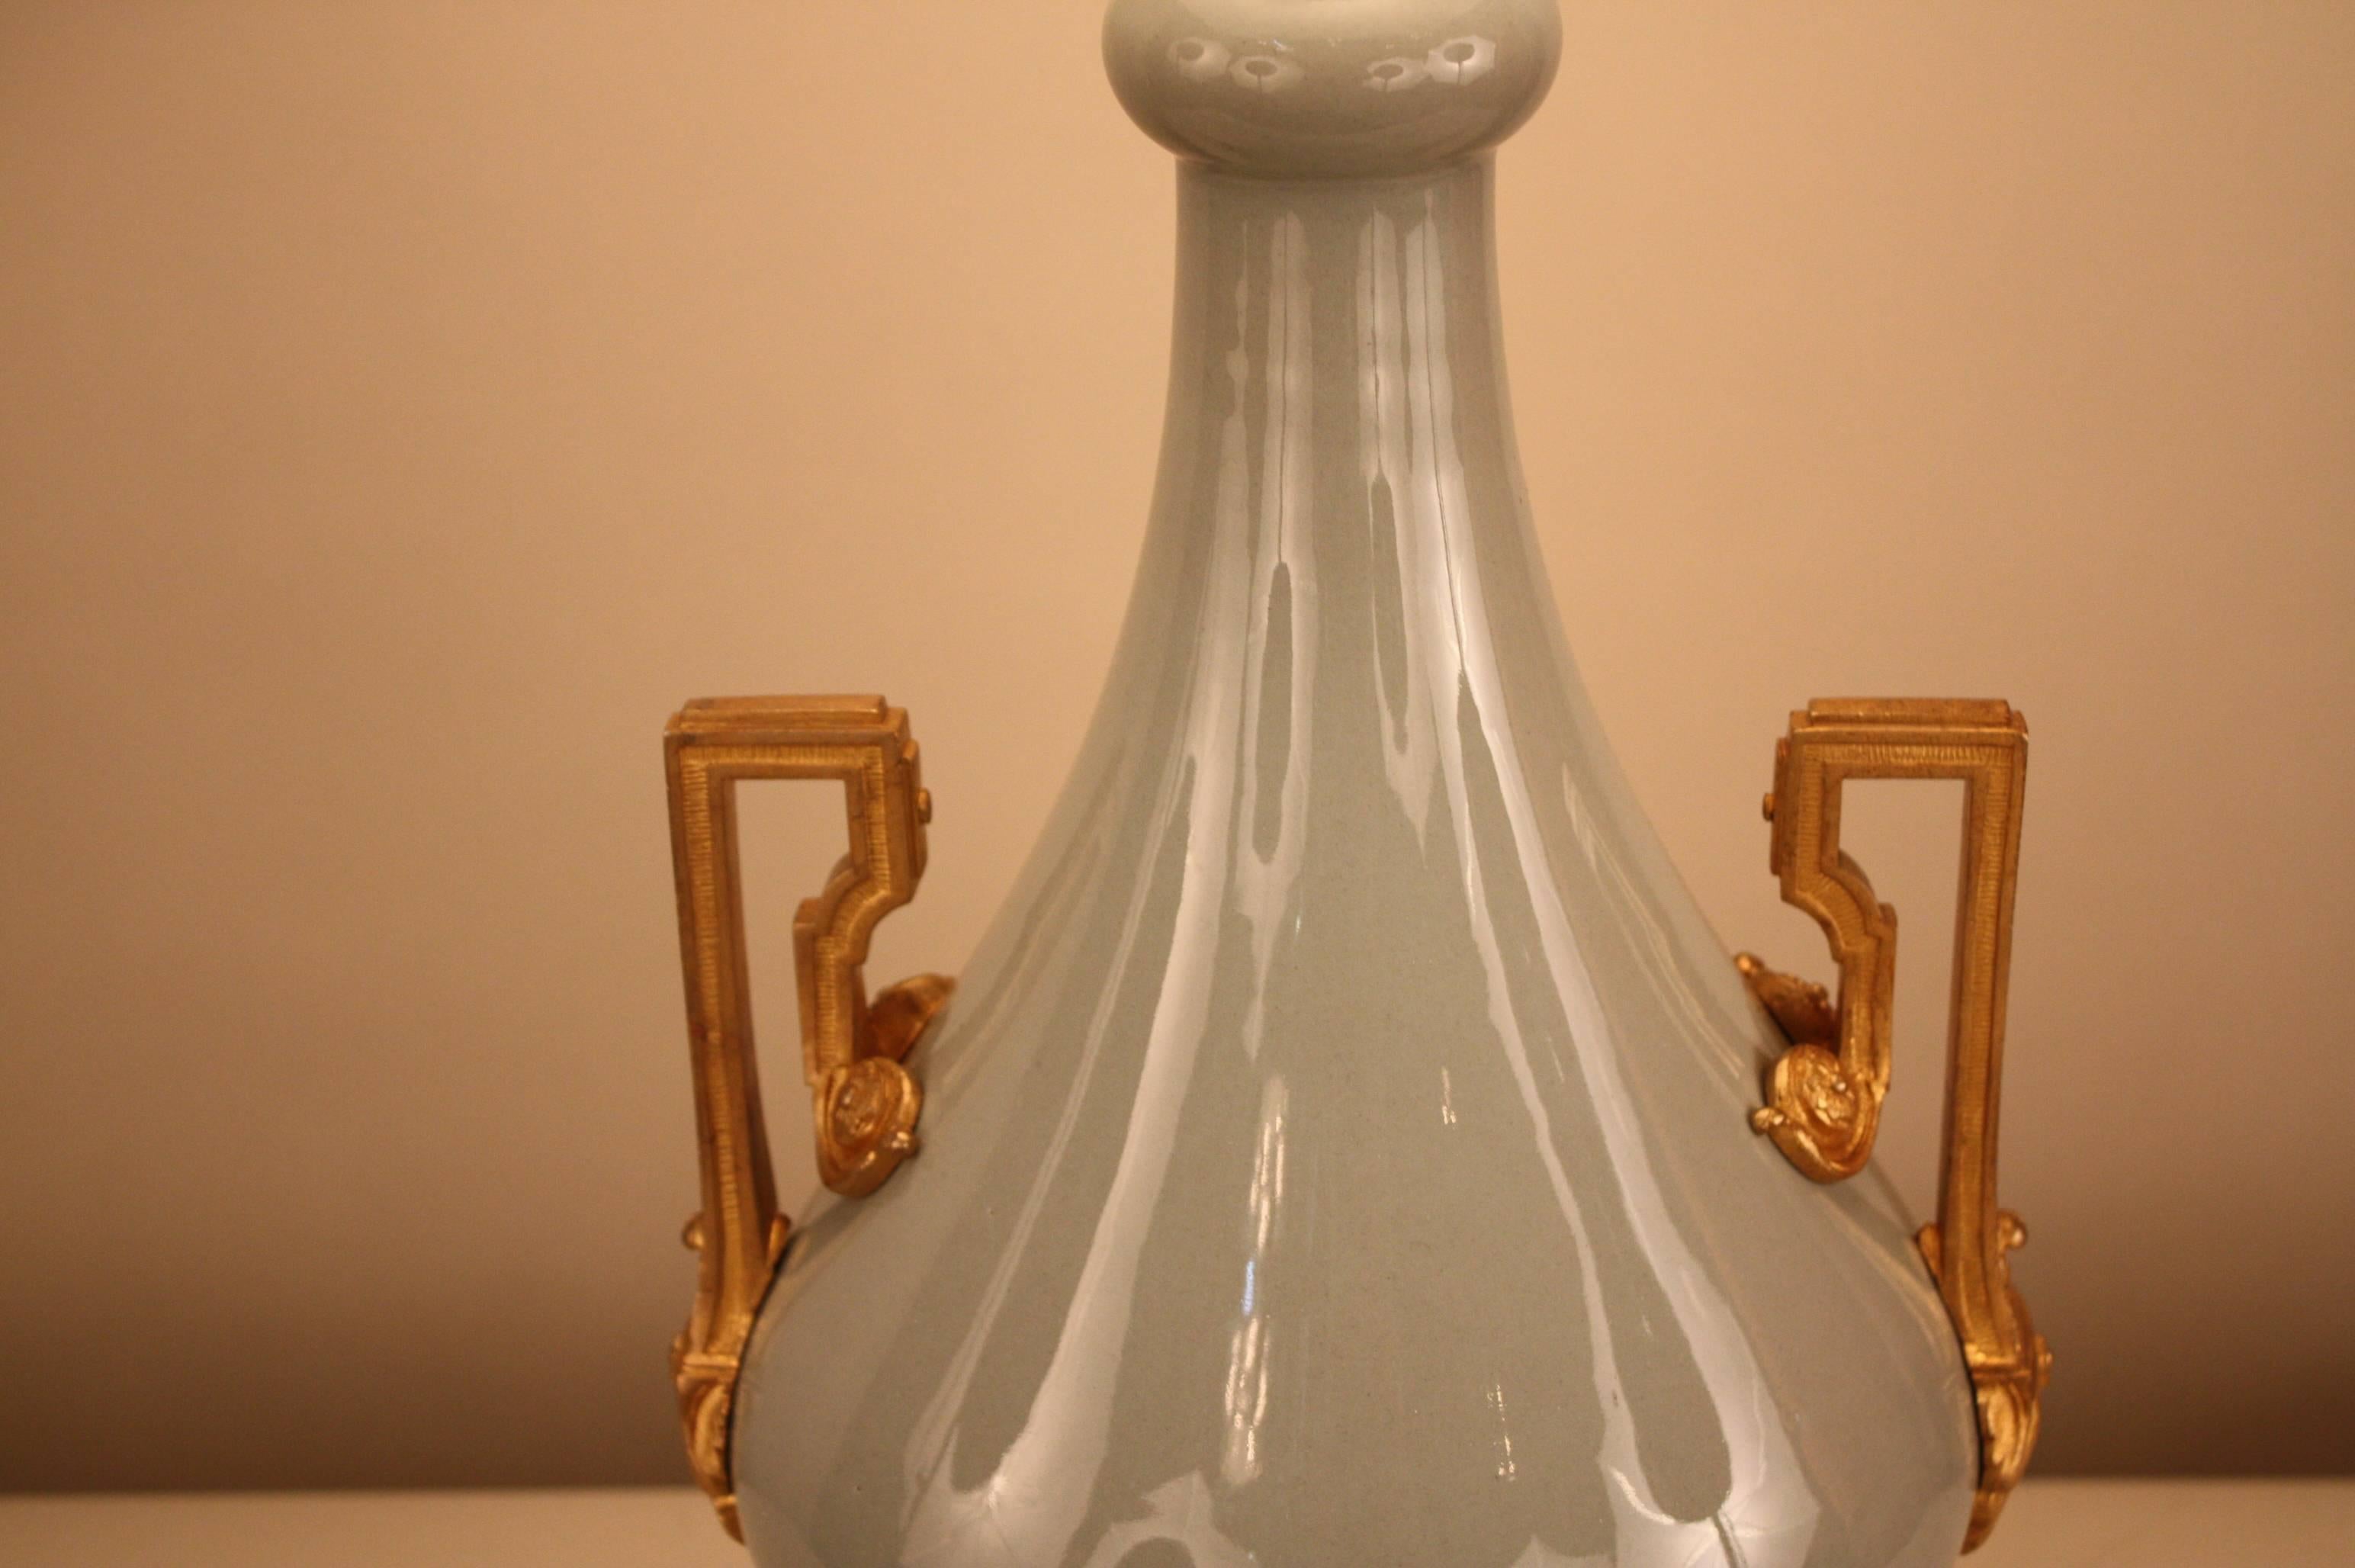 French 19th Century Porcelain and Bronze Electrified Oil Lamp by Gagneau & Co 1